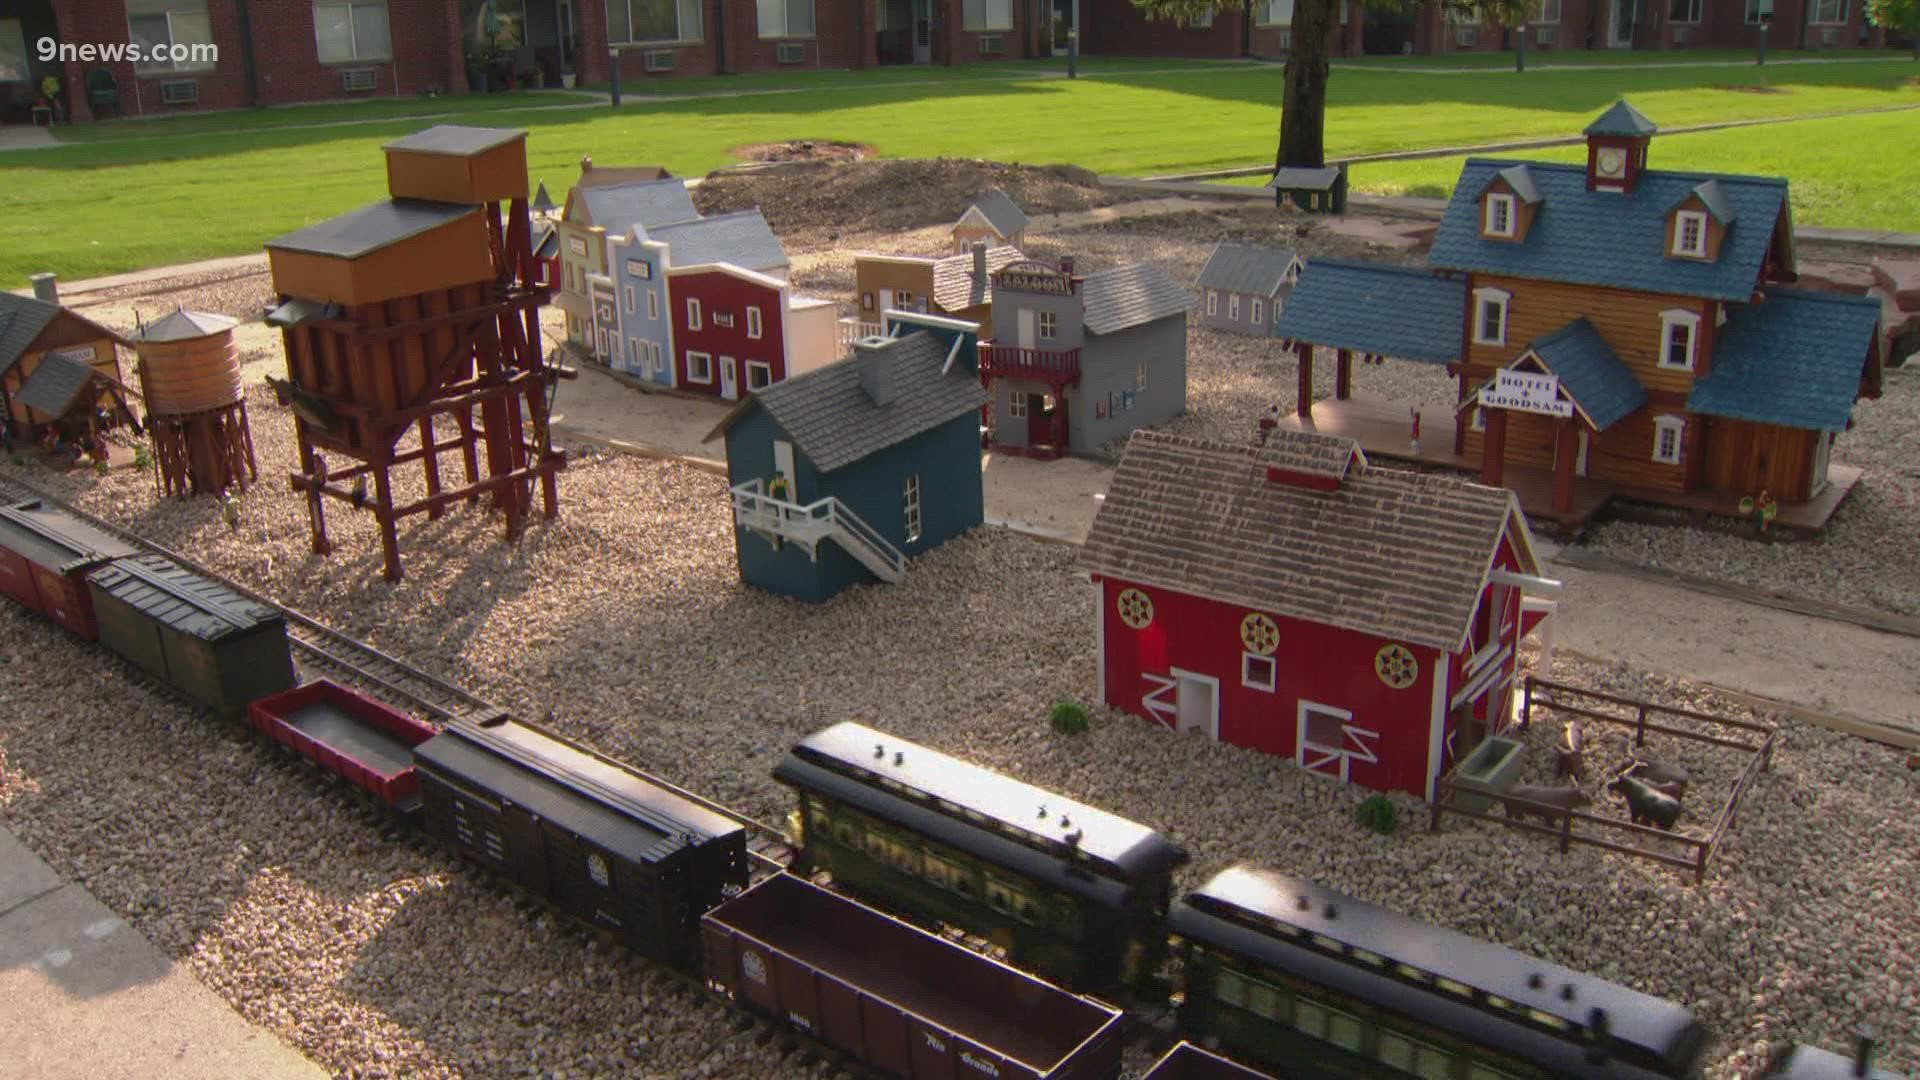 About a dozens residents at the Good Samaritan Society in Loveland are connecting through a love of model trains.